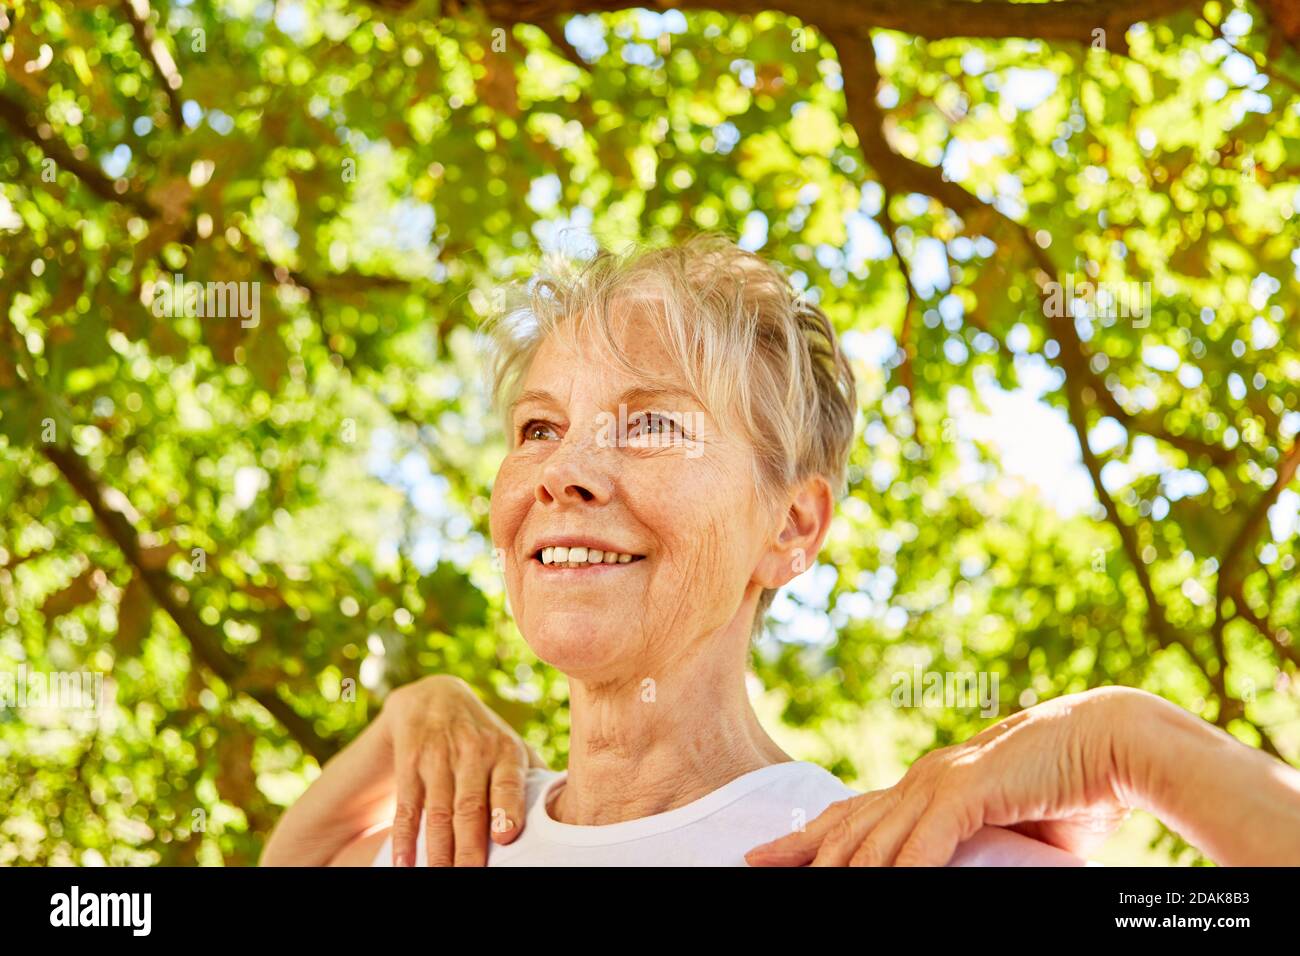 Relaxed senior woman doing a breathing exercise for health and wellbeing Stock Photo